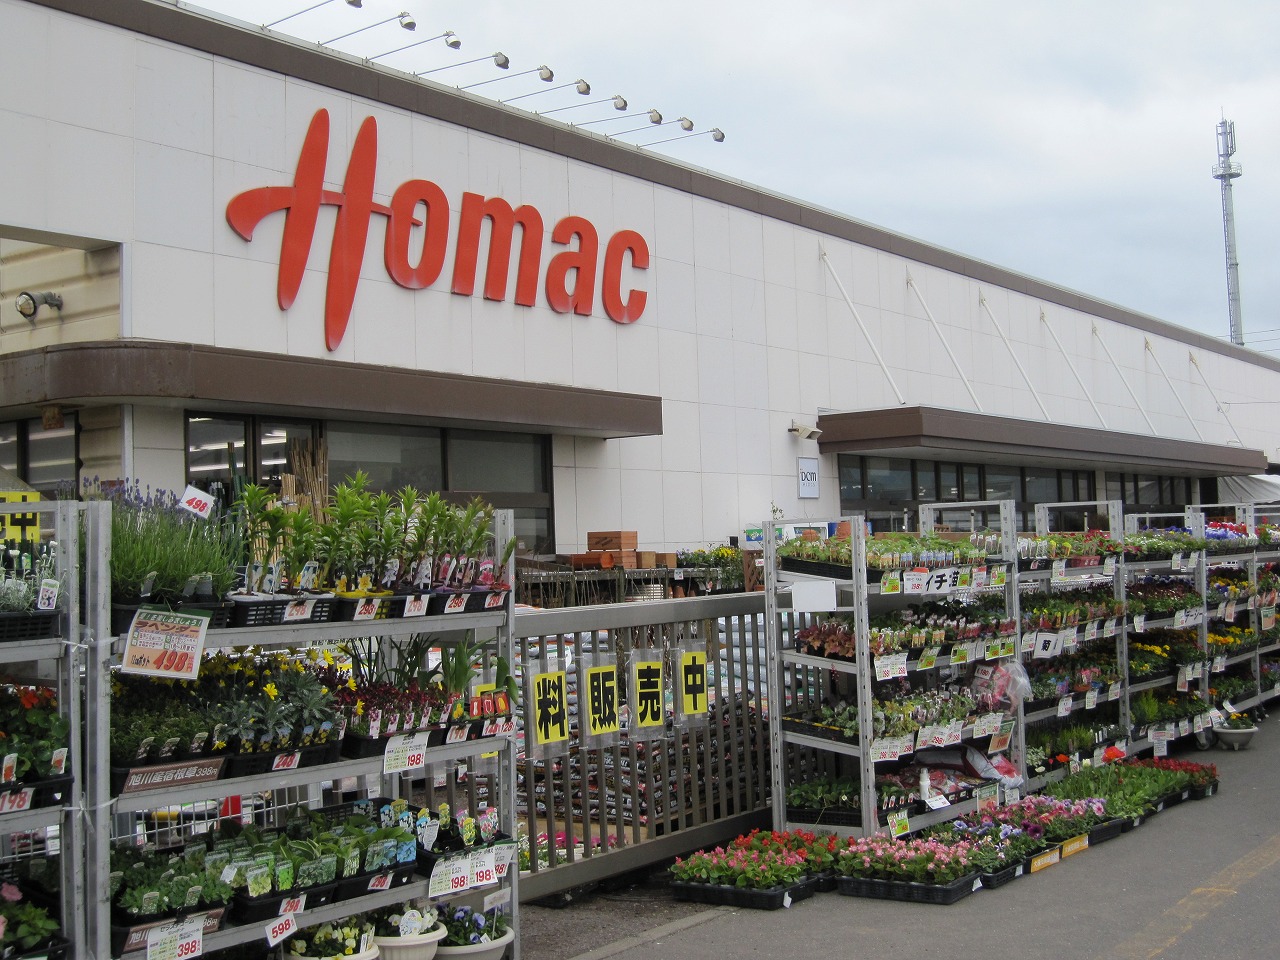 Home center. Homac Corporation Itoi to the store (hardware store) 1729m